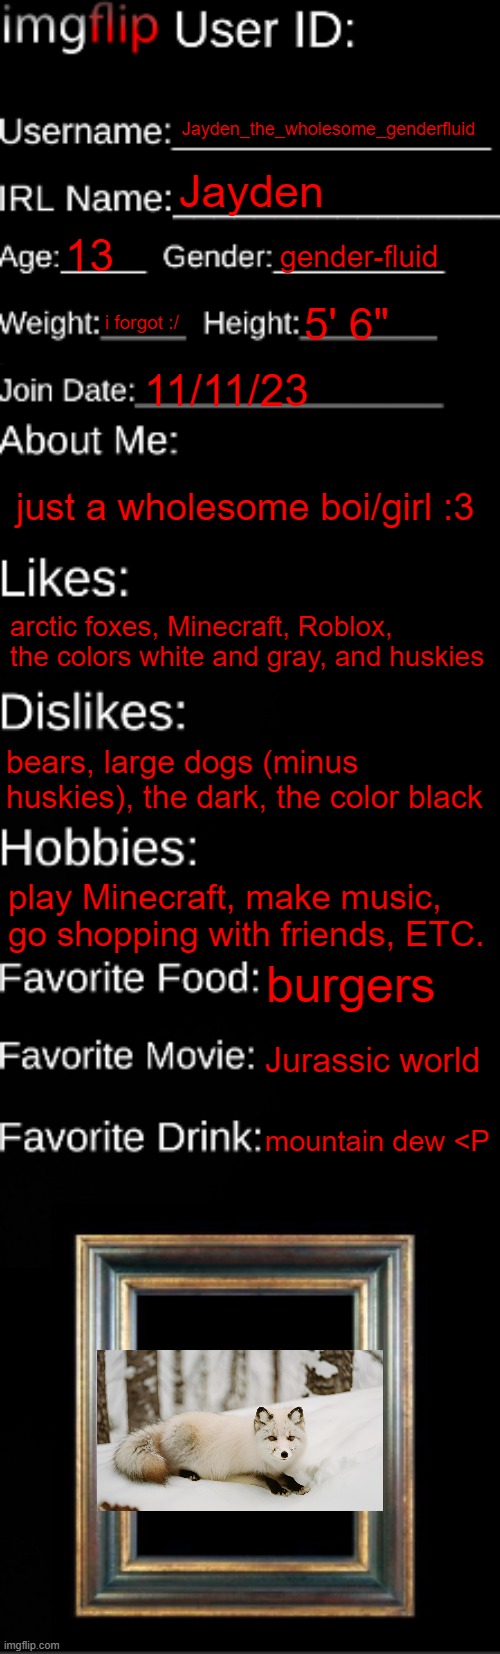 :3 | Jayden_the_wholesome_genderfluid; Jayden; 13; gender-fluid; i forgot :/; 5' 6"; 11/11/23; just a wholesome boi/girl :3; arctic foxes, Minecraft, Roblox, the colors white and gray, and huskies; bears, large dogs (minus huskies), the dark, the color black; play Minecraft, make music, go shopping with friends, ETC. burgers; Jurassic world; mountain dew <P | image tagged in imgflip id card | made w/ Imgflip meme maker